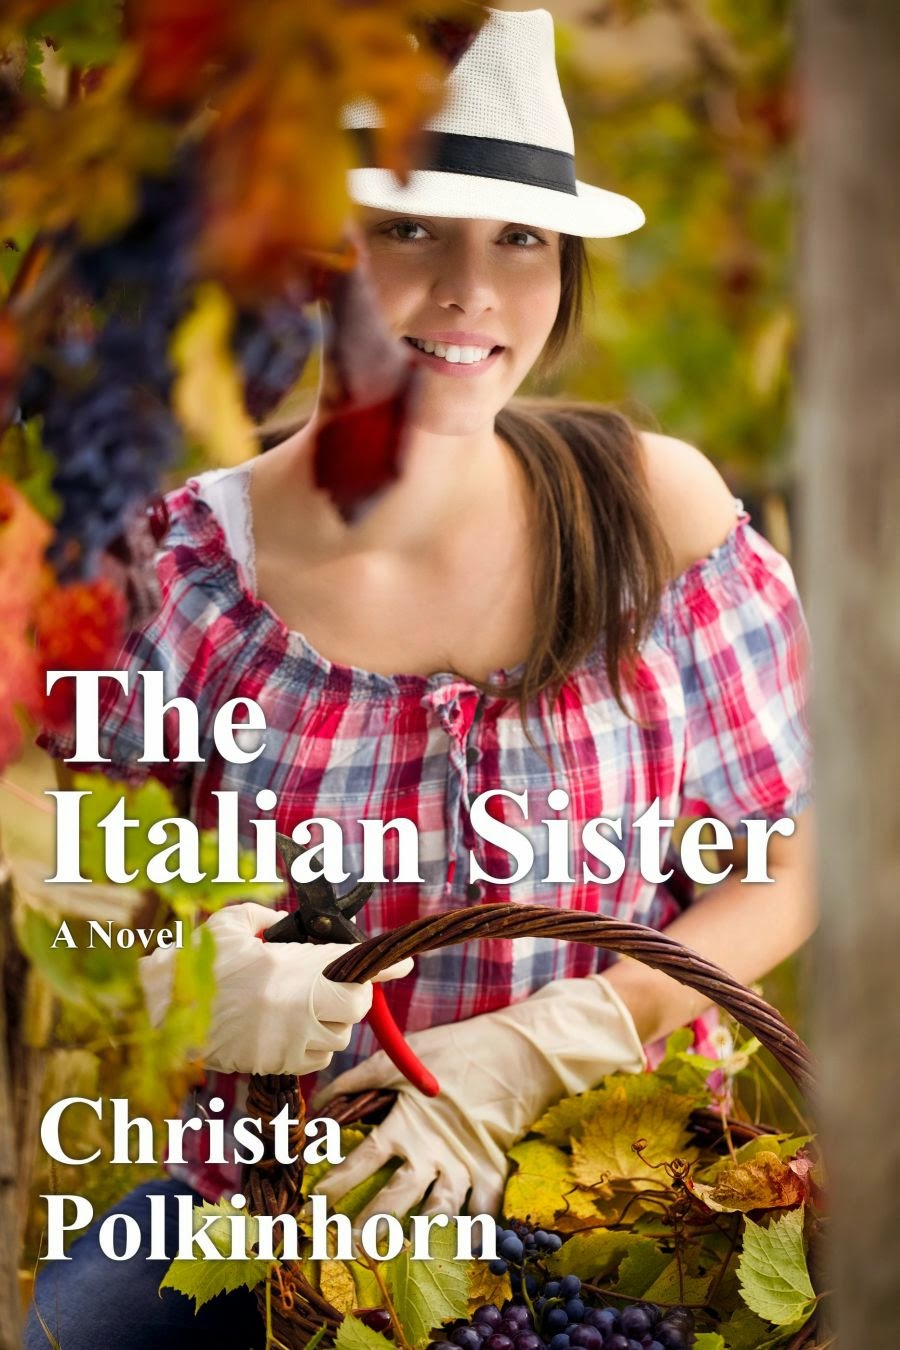 The Italian Sister (The Wine Lover's Daughter, Book 1) CLICK ON THE BOOK COVERS BELOW.